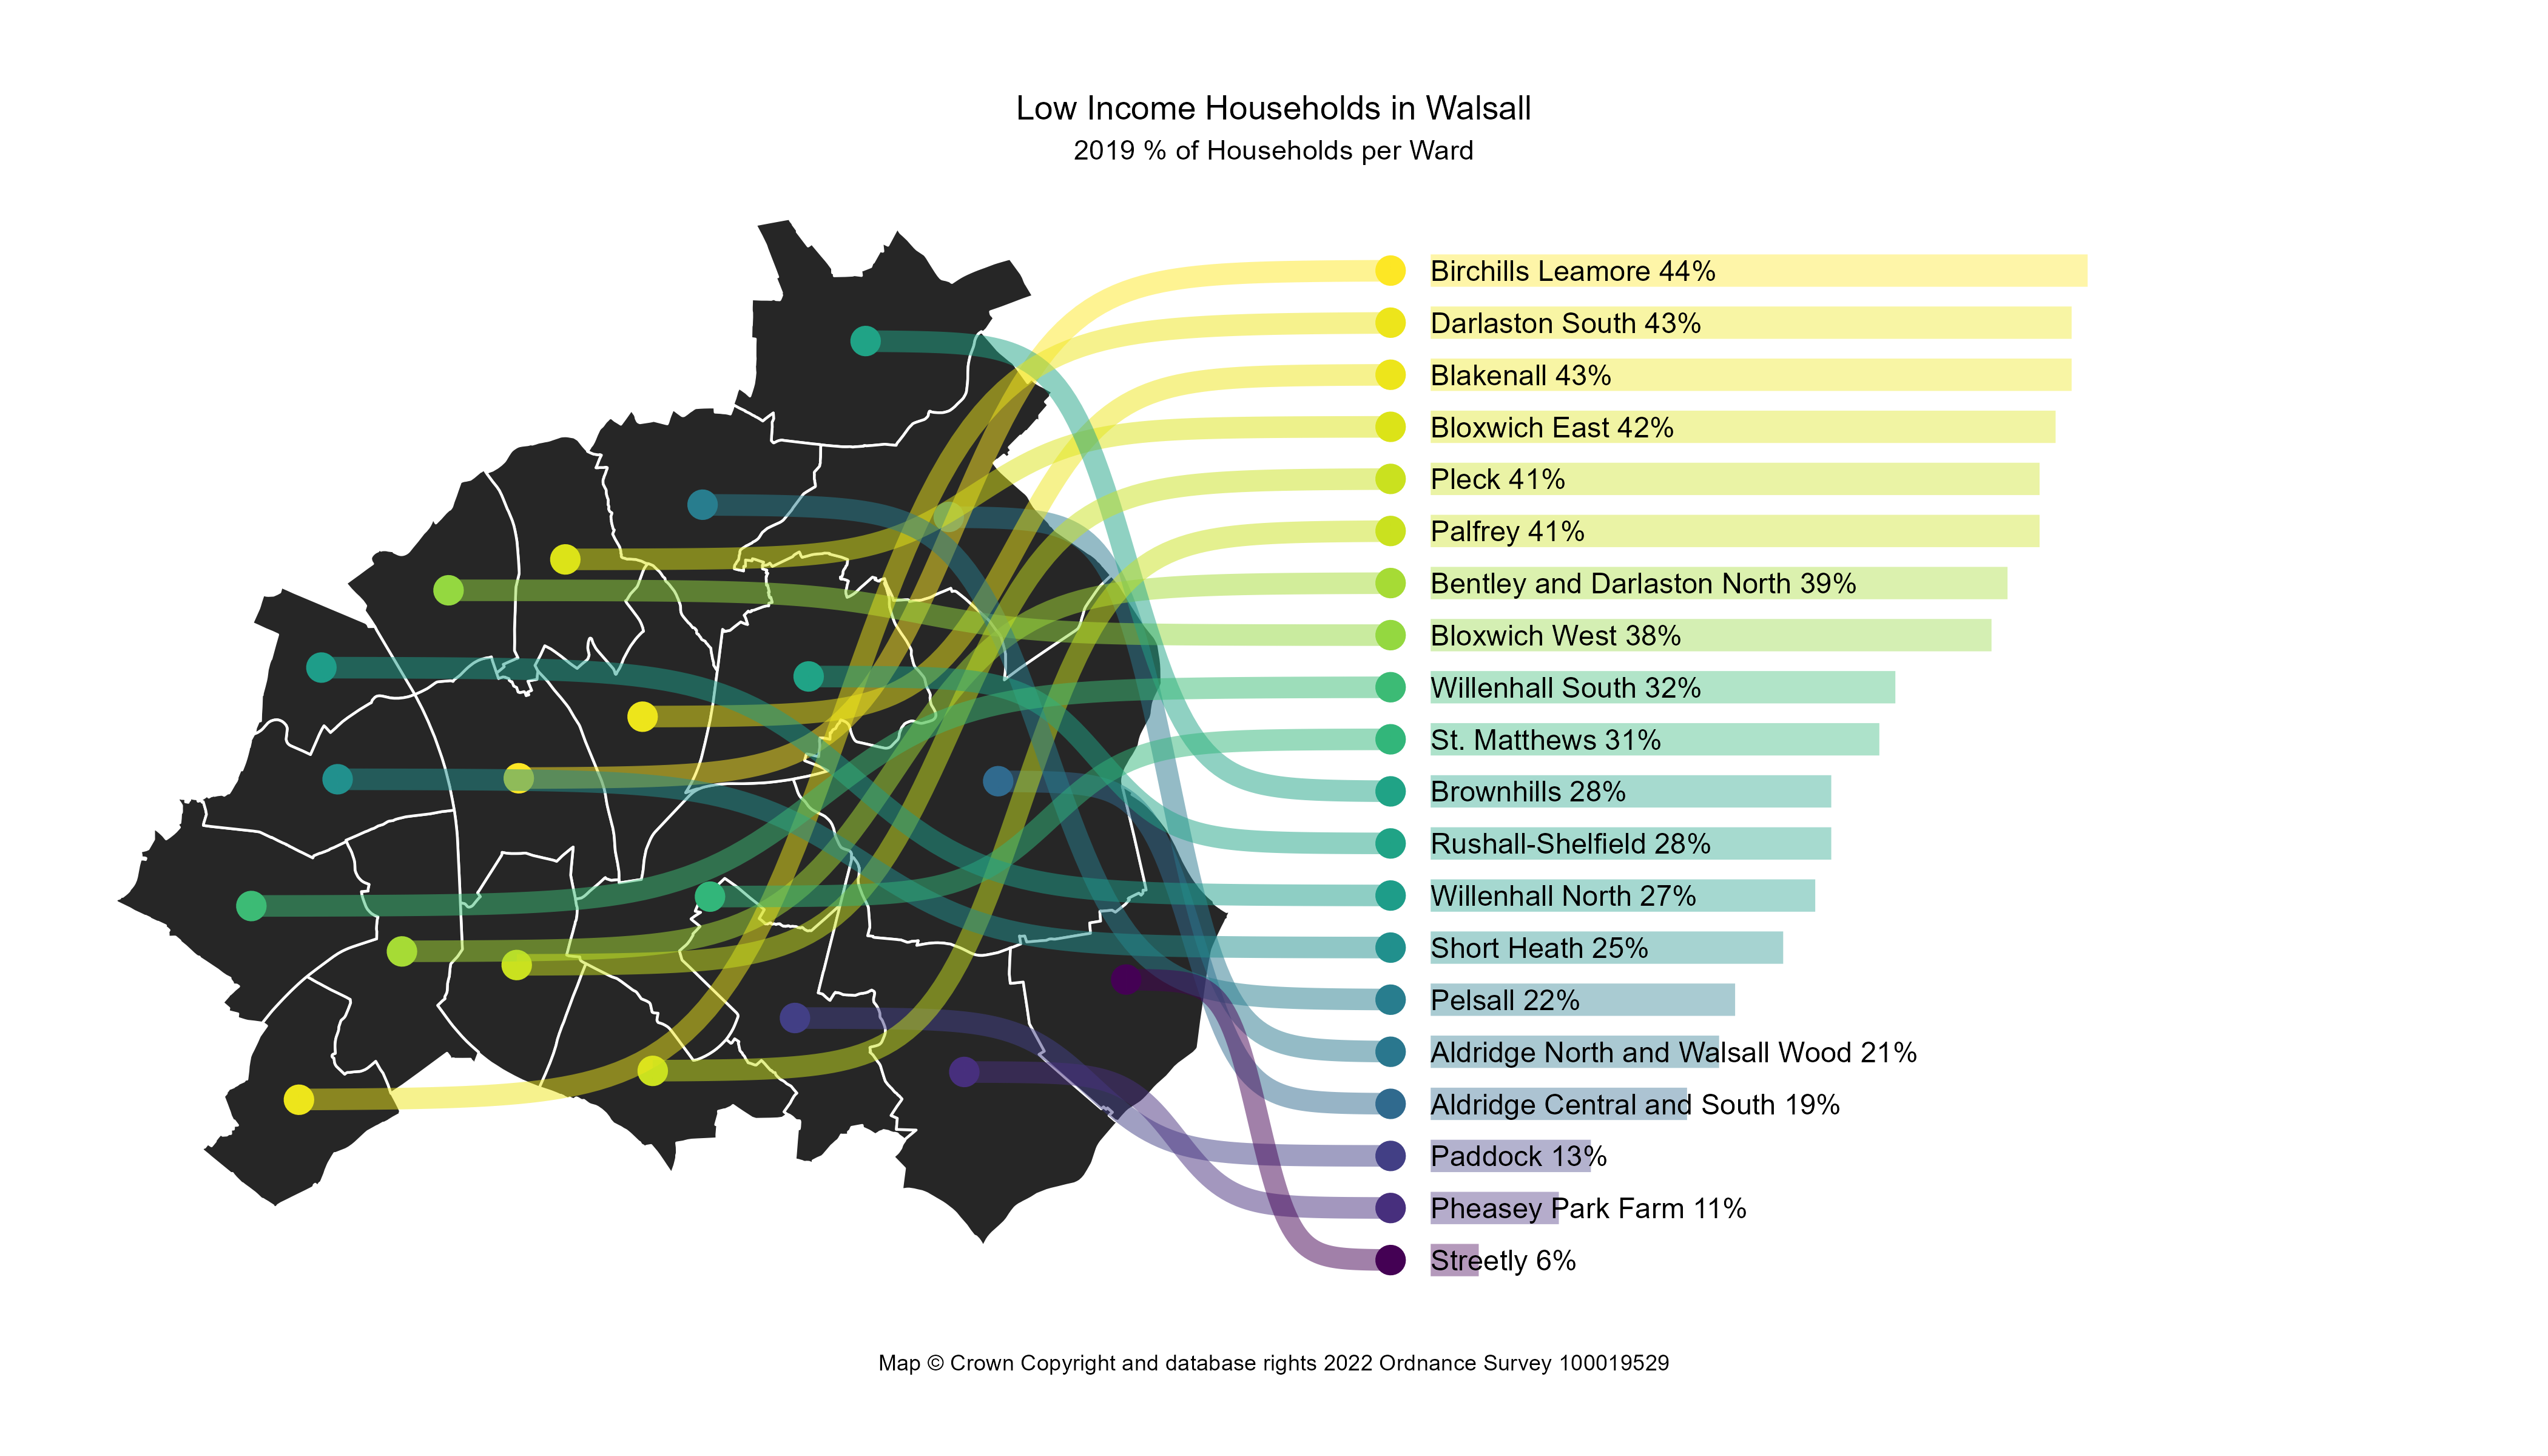 Map detailing percentage of low income households per ward in Walsall